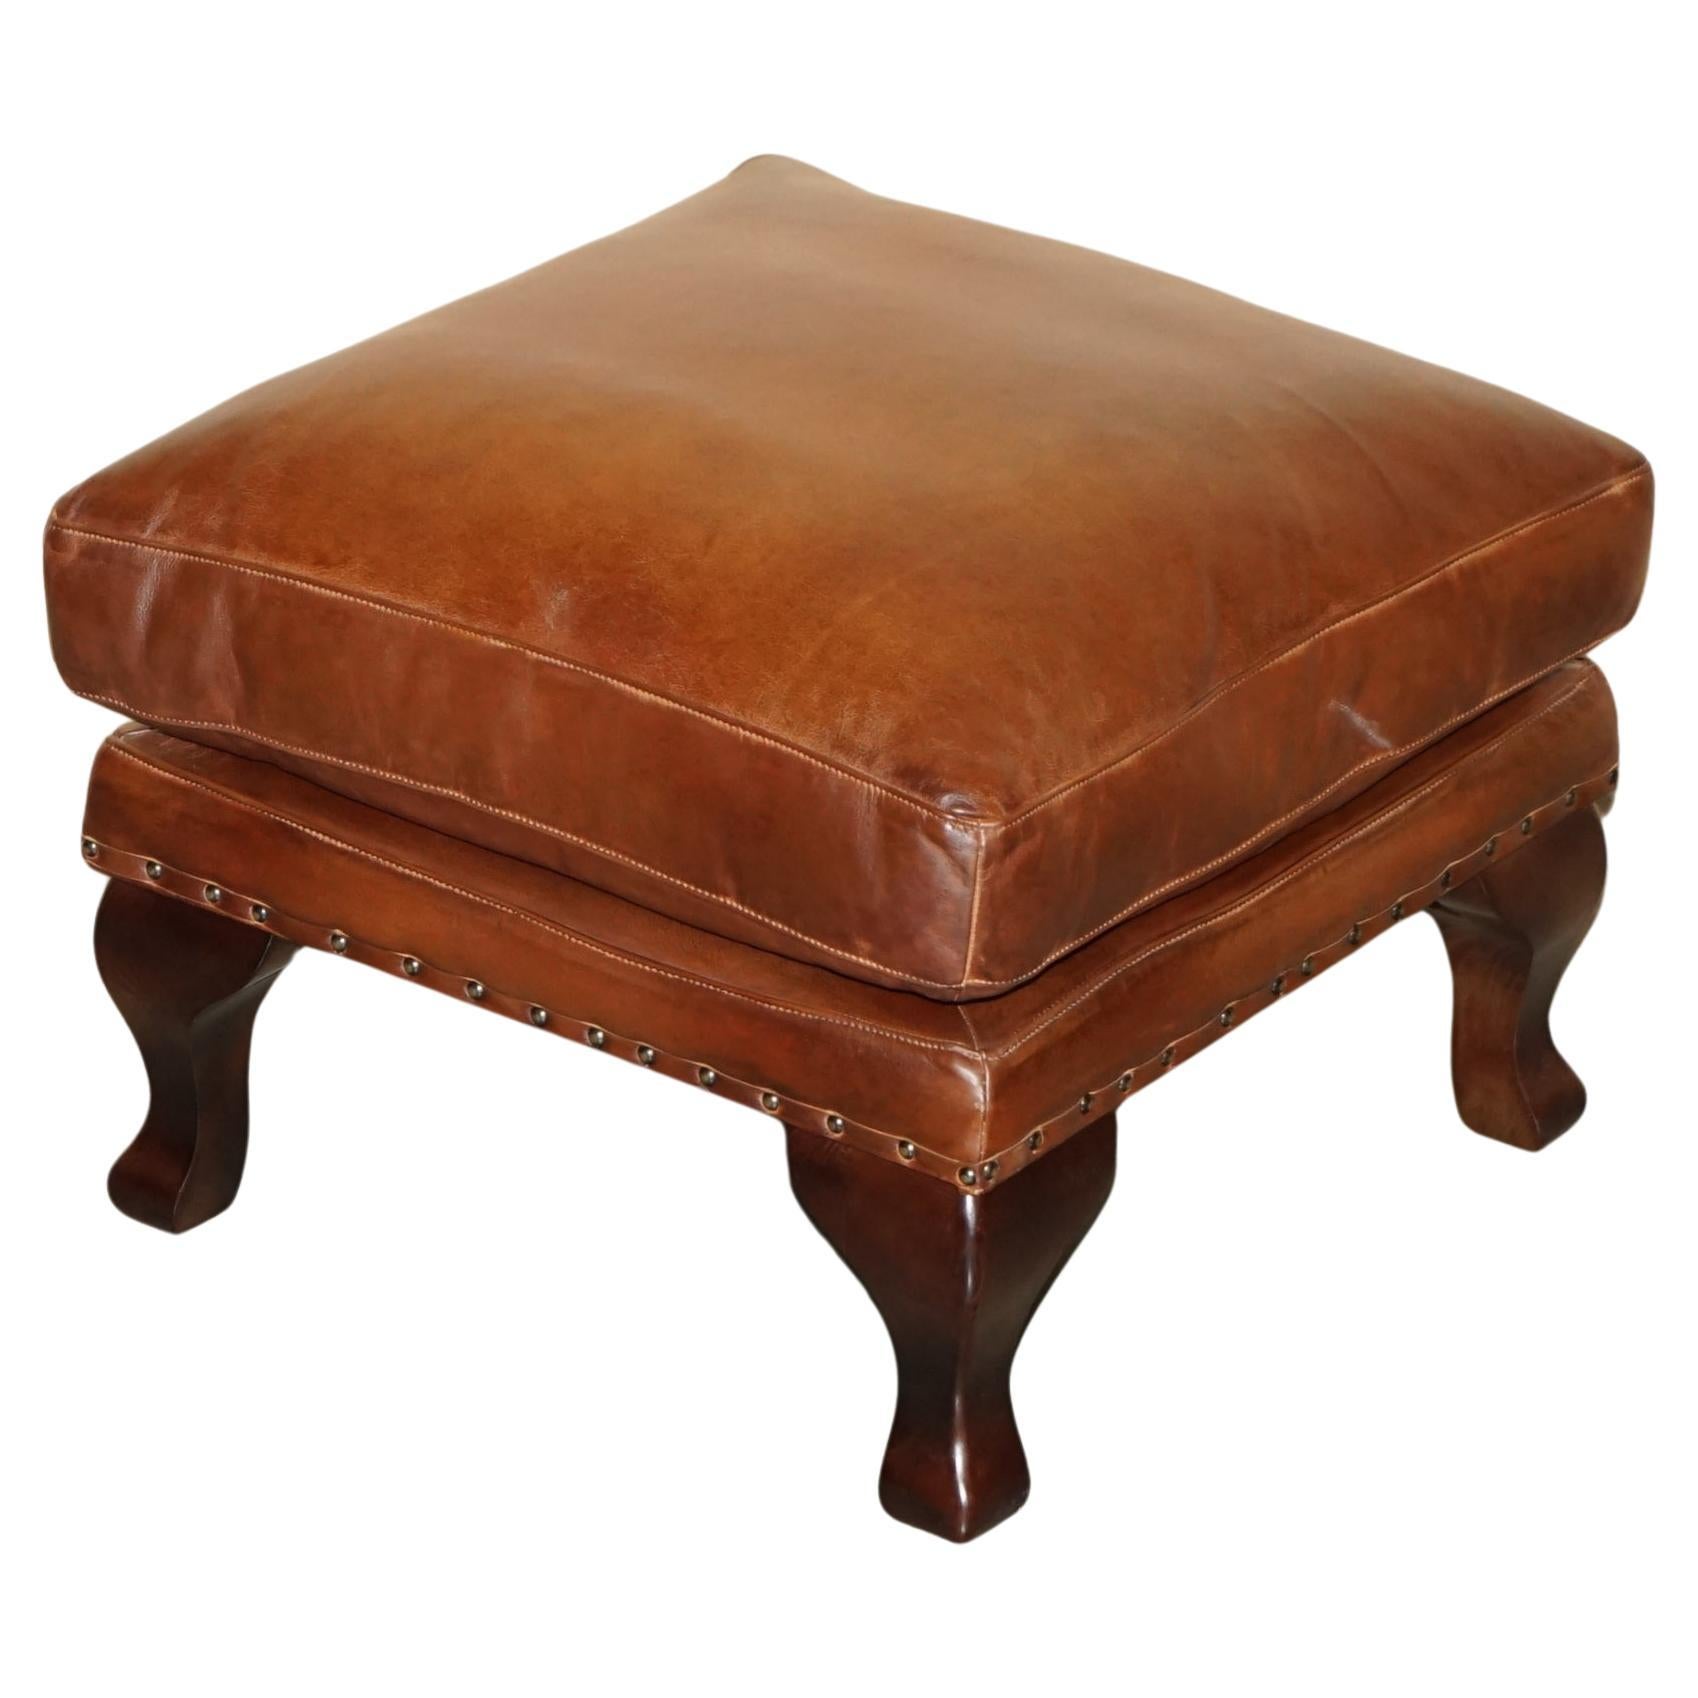 TETRAD BROWN LEATHER LARGE FOOTSTOOL LARGE ENoUGH FOR TWO PEOPLE TO SHARE For Sale